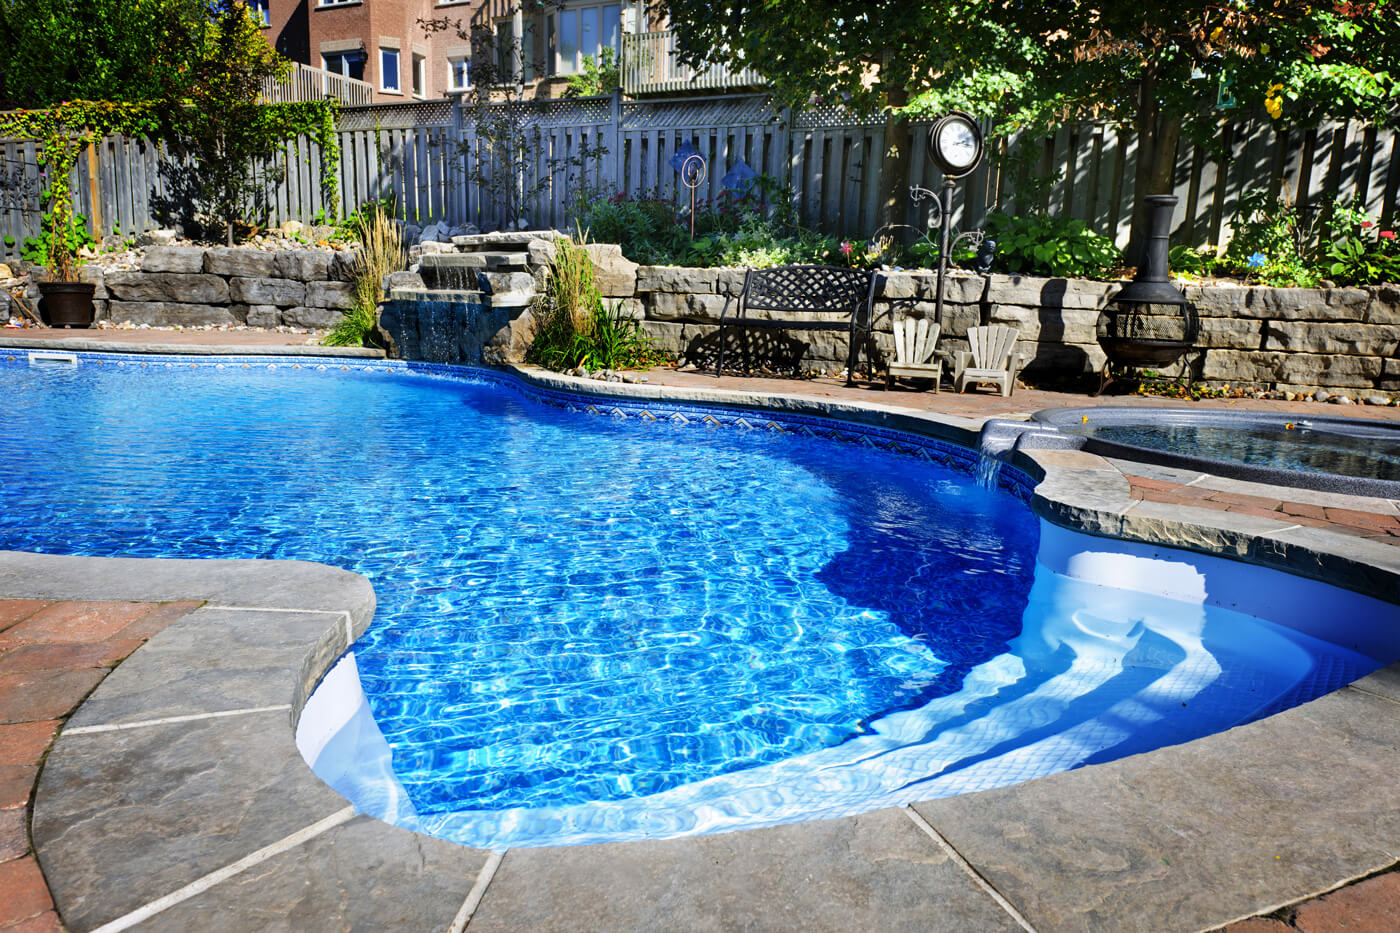 Large vinyl lined inground pool and outdoor living renovation by Seaway's custom pool builders and landscape designers.